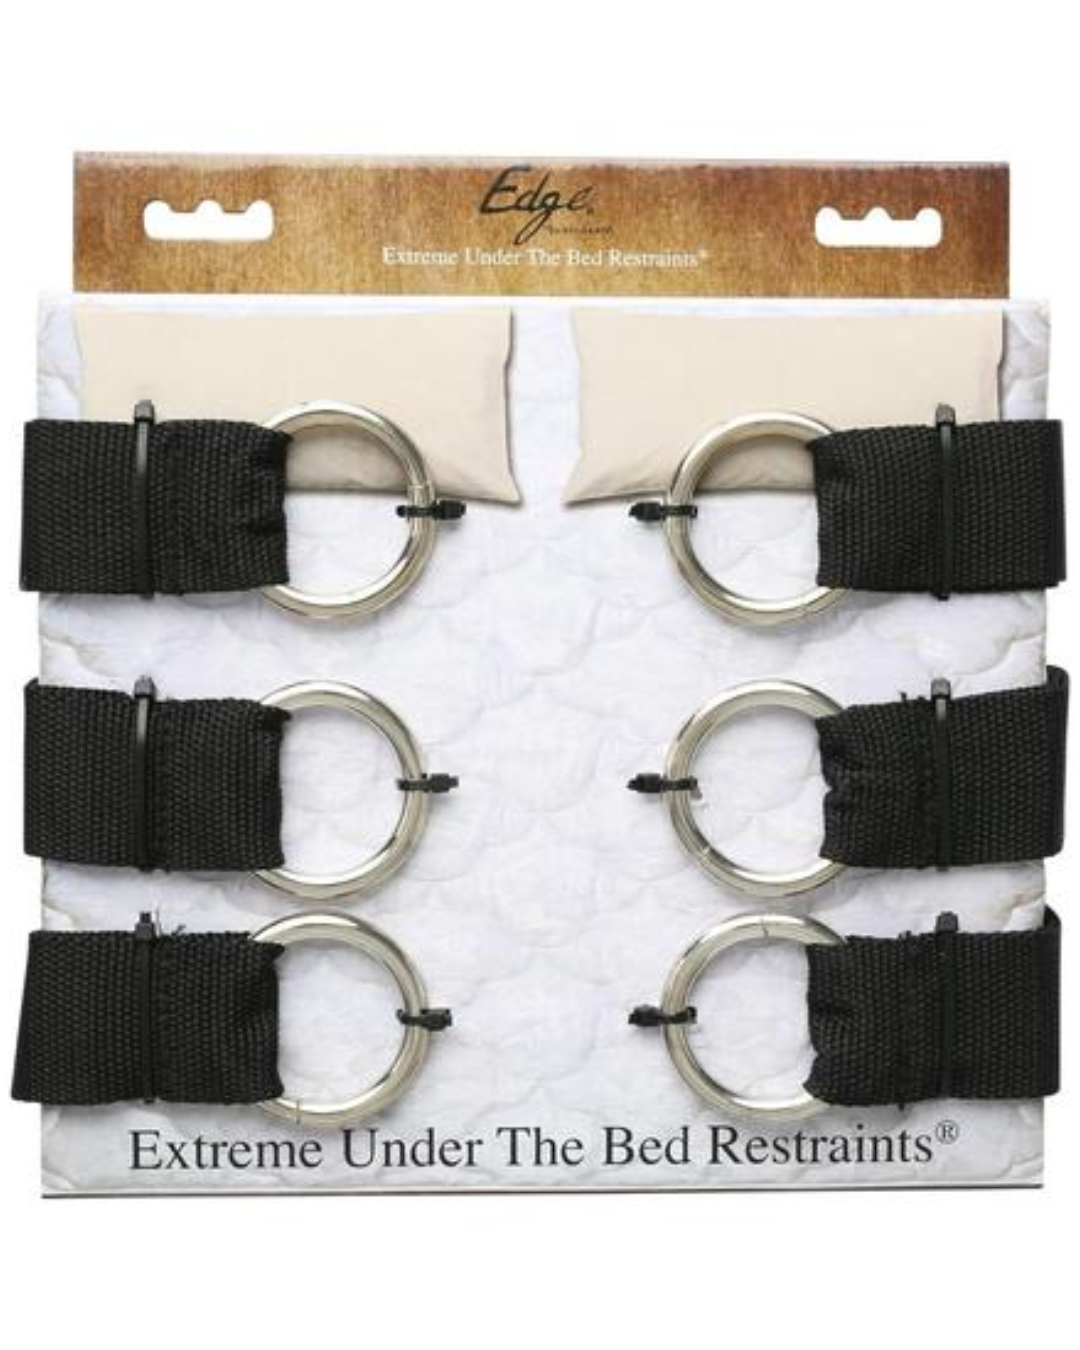 Extreme Under The Bed Restraint® by Sportsheets